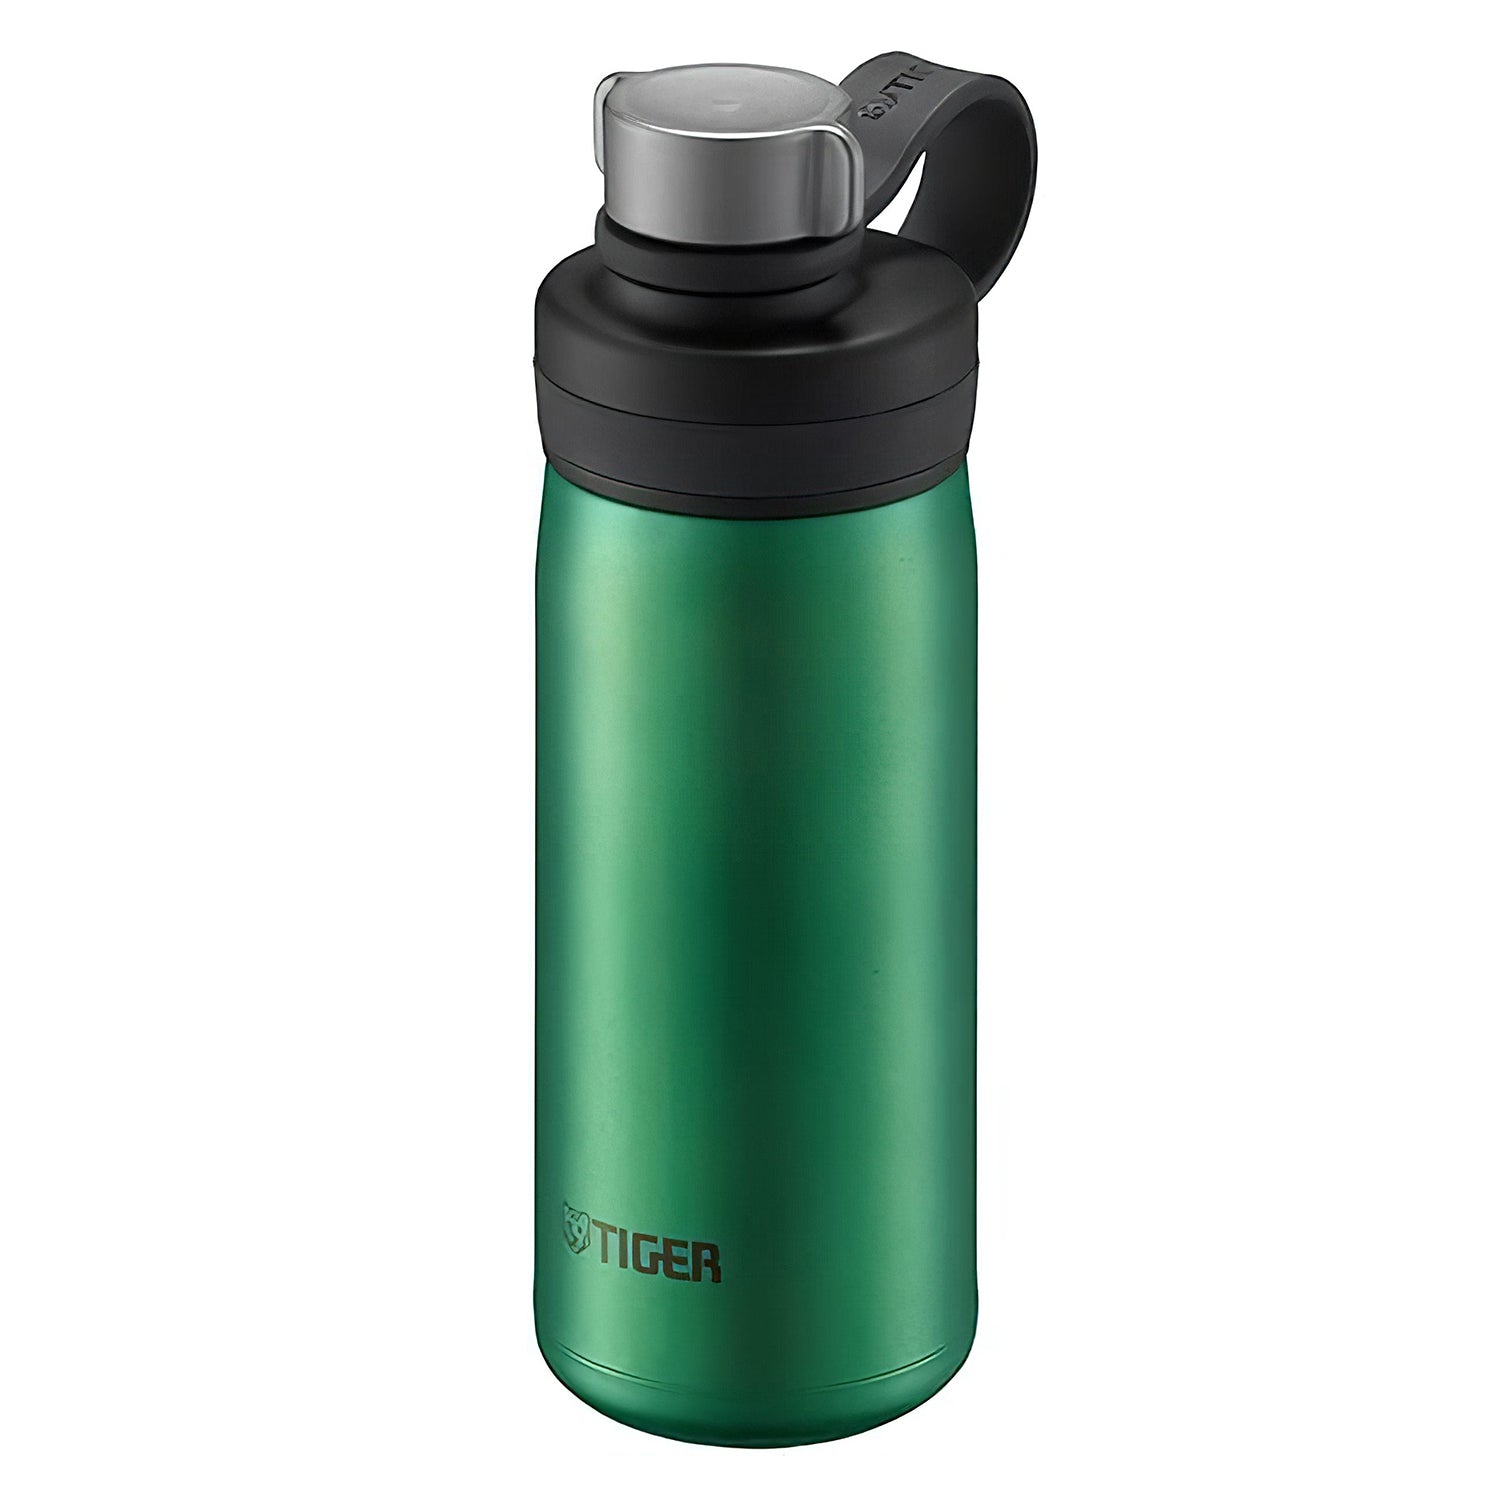 https://cdn.shopify.com/s/files/1/1610/3863/products/TigerStainlessSteelWaterBottleMTA-T050_2_1600x.jpg?v=1656983088